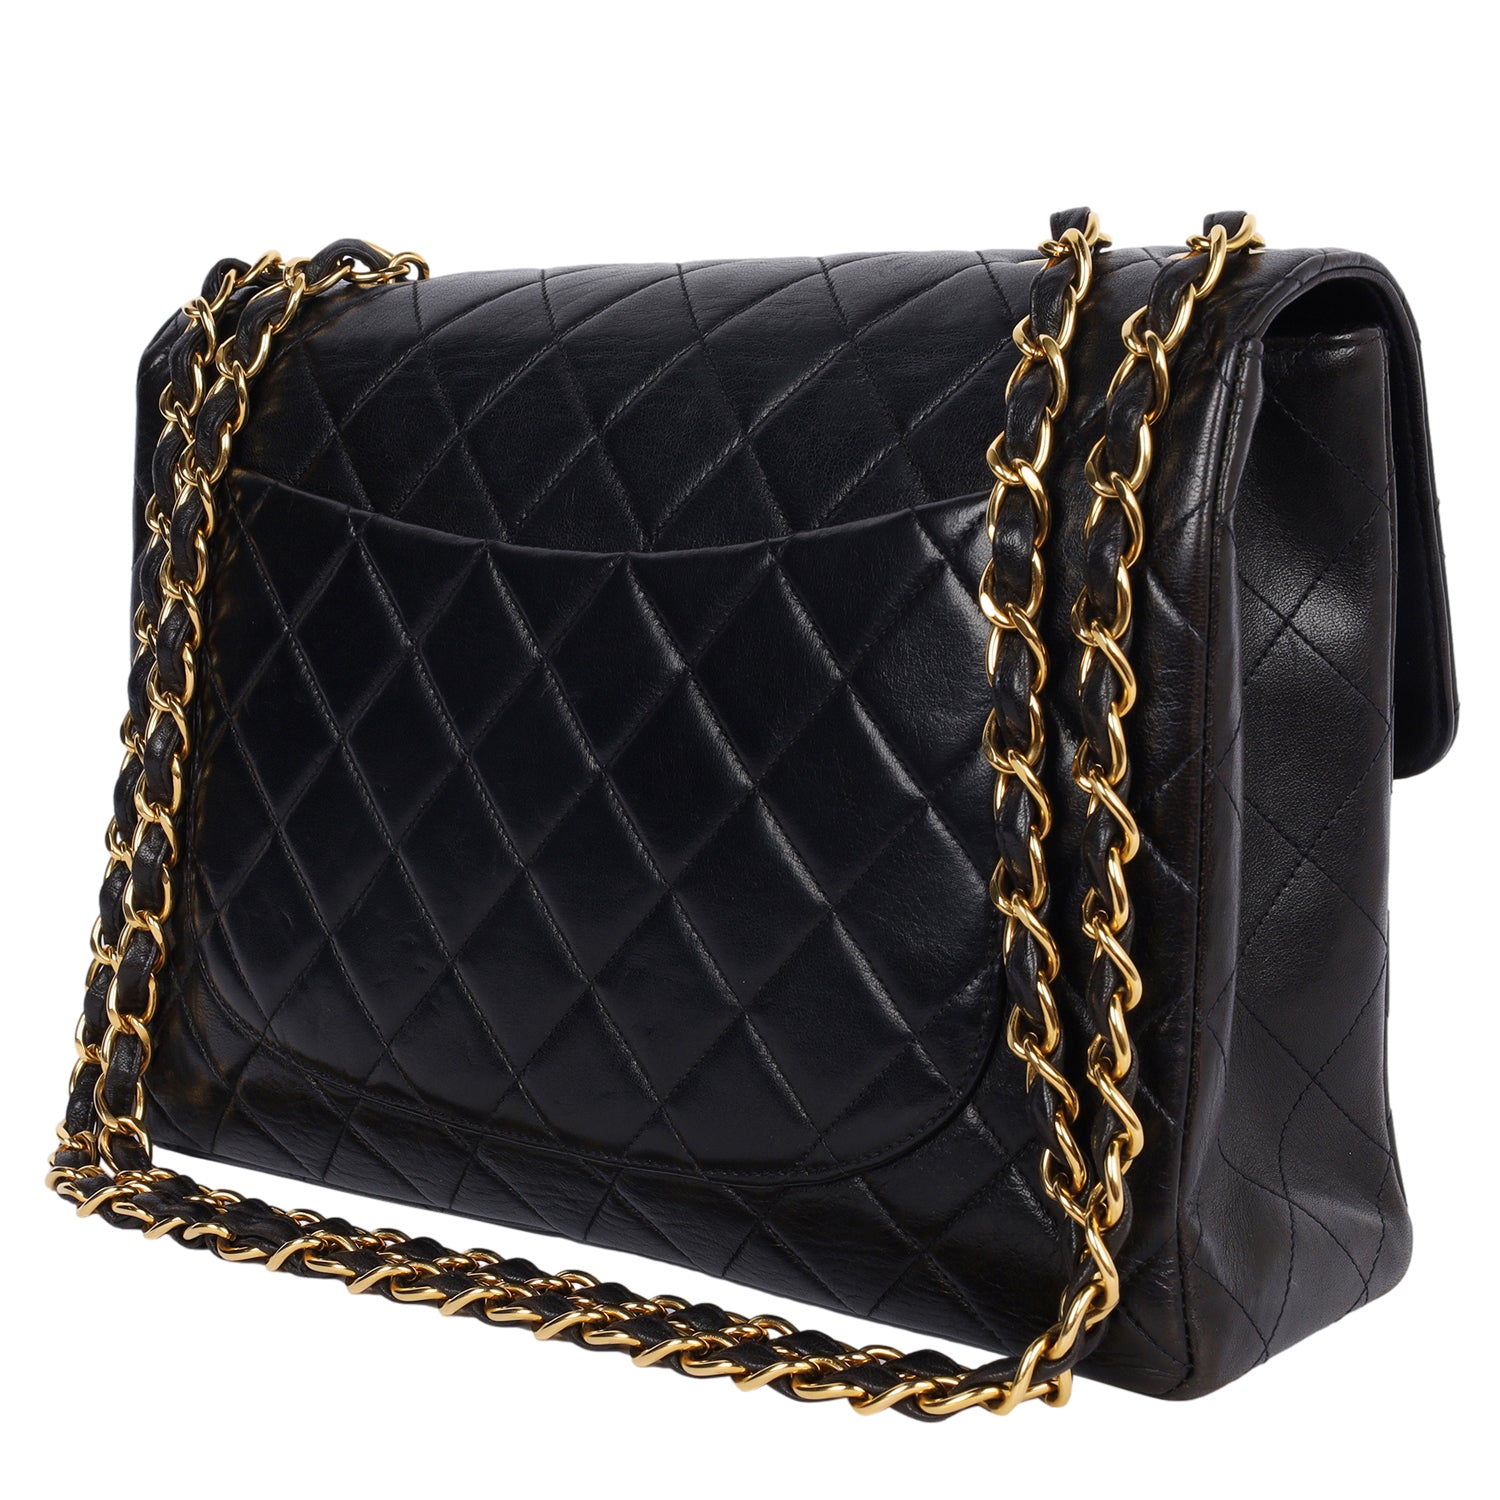 CHANEL, Bags, Chanel Quilted Jumbo Patent Leather Backpack